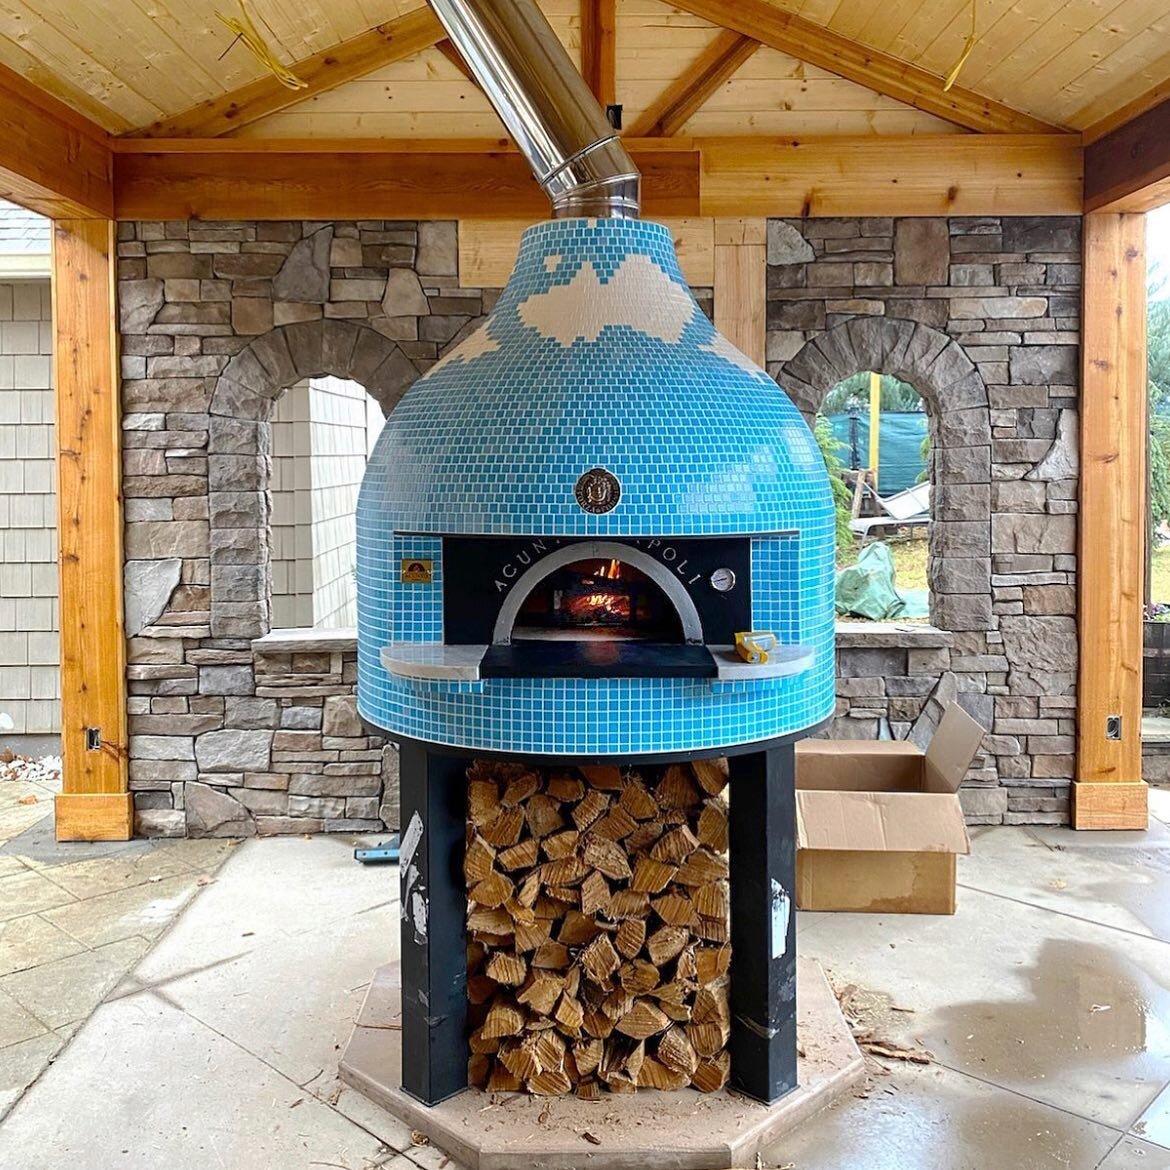 Do you want to learn how to make Neapolitan pizza like a pro? 

🚨Here is the deal! 🚨

These @forzafornihome @forza_forni ovens are the best addition to your patio, Customized to your colors, and they will come with pizza classes included! 

🔥Learn